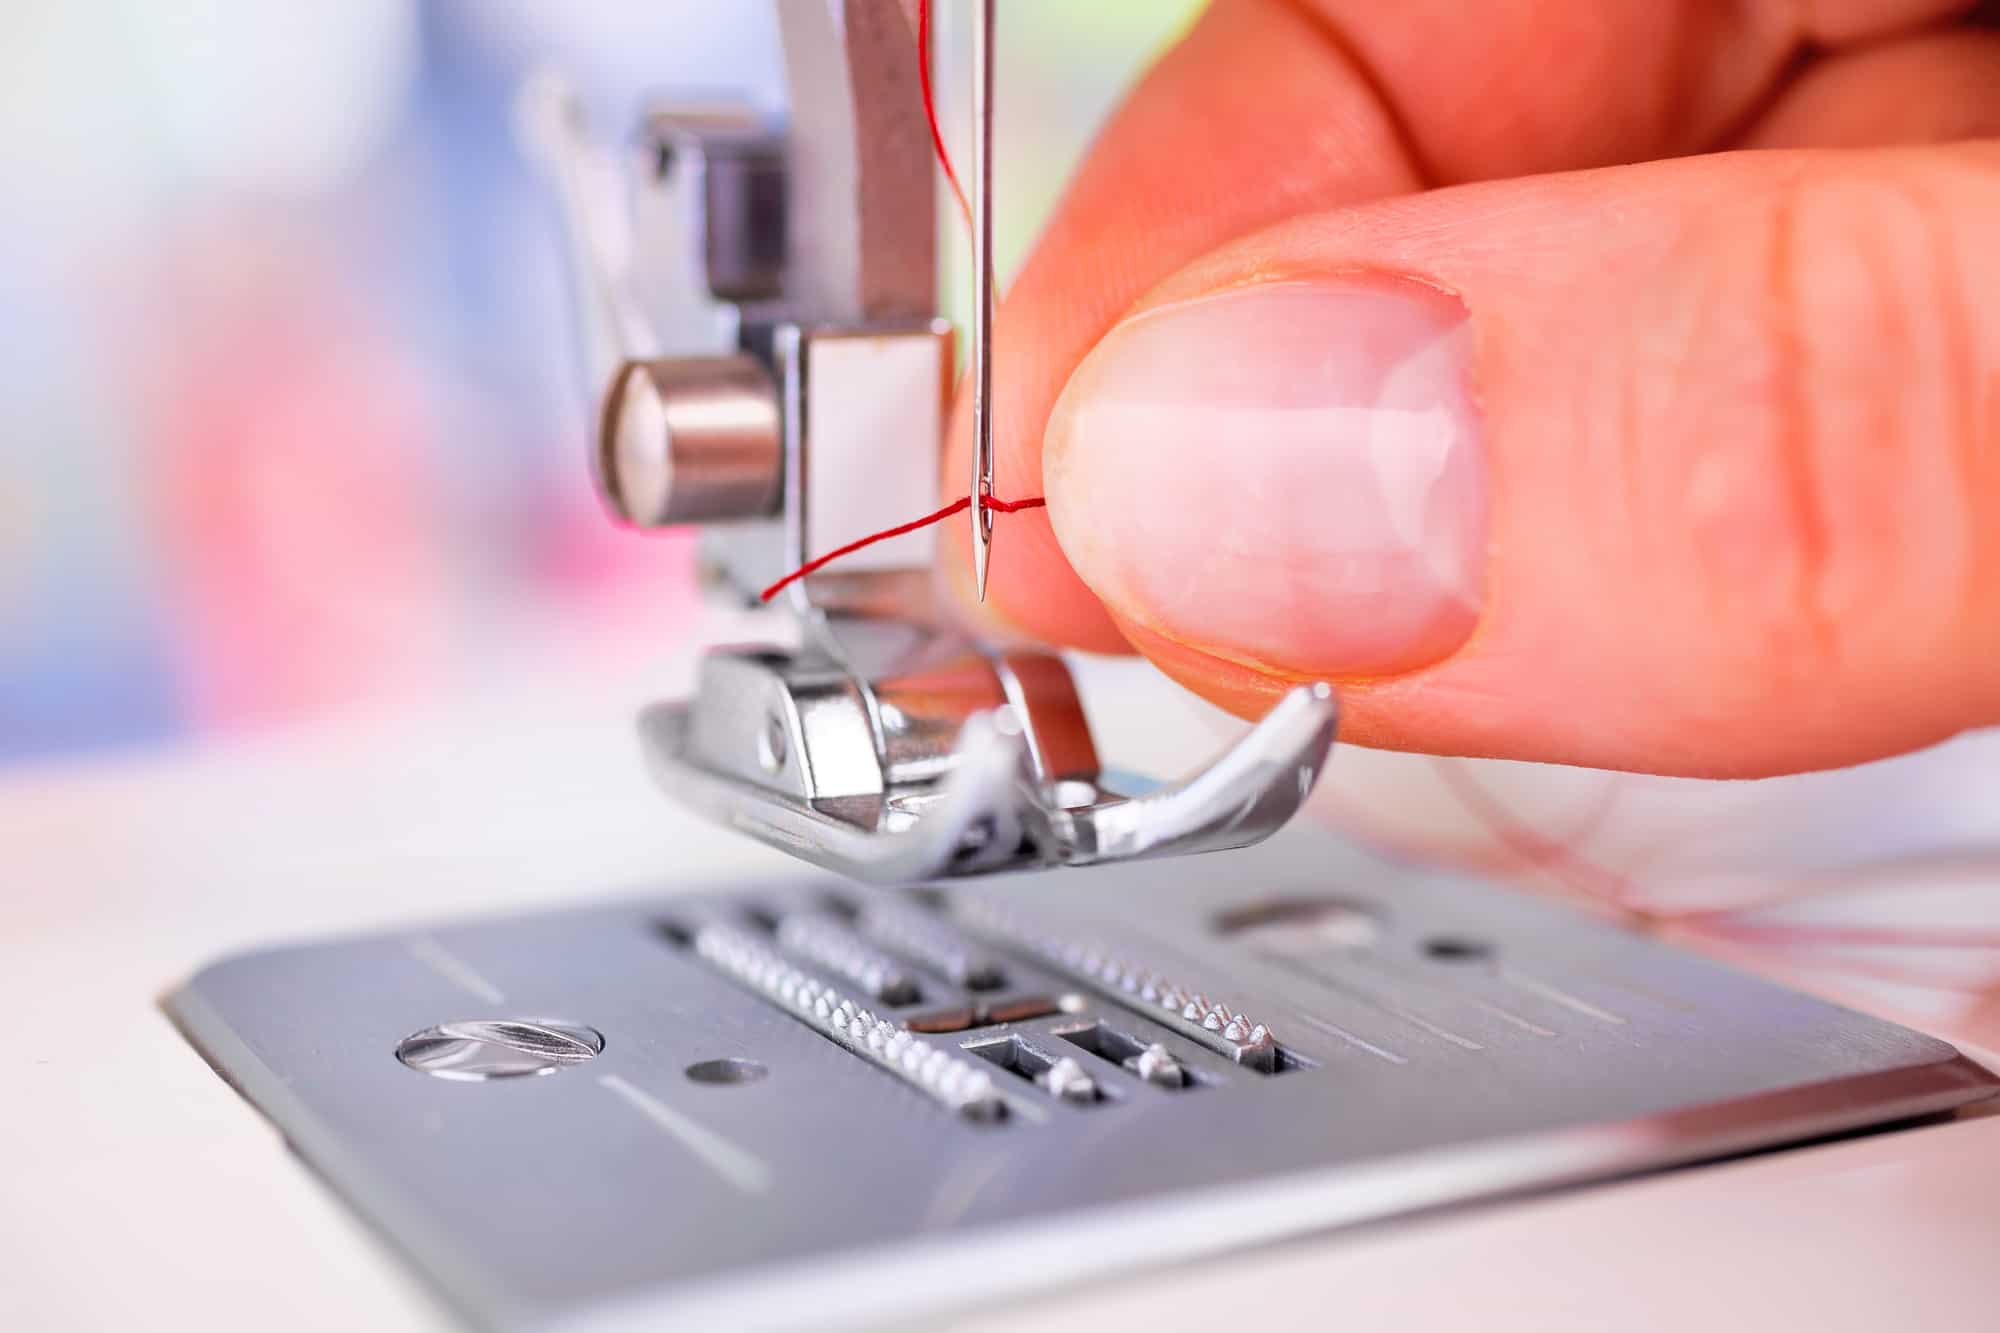 How to Thread a Brother Sewing Machine - a Step-by-Step Guide - She